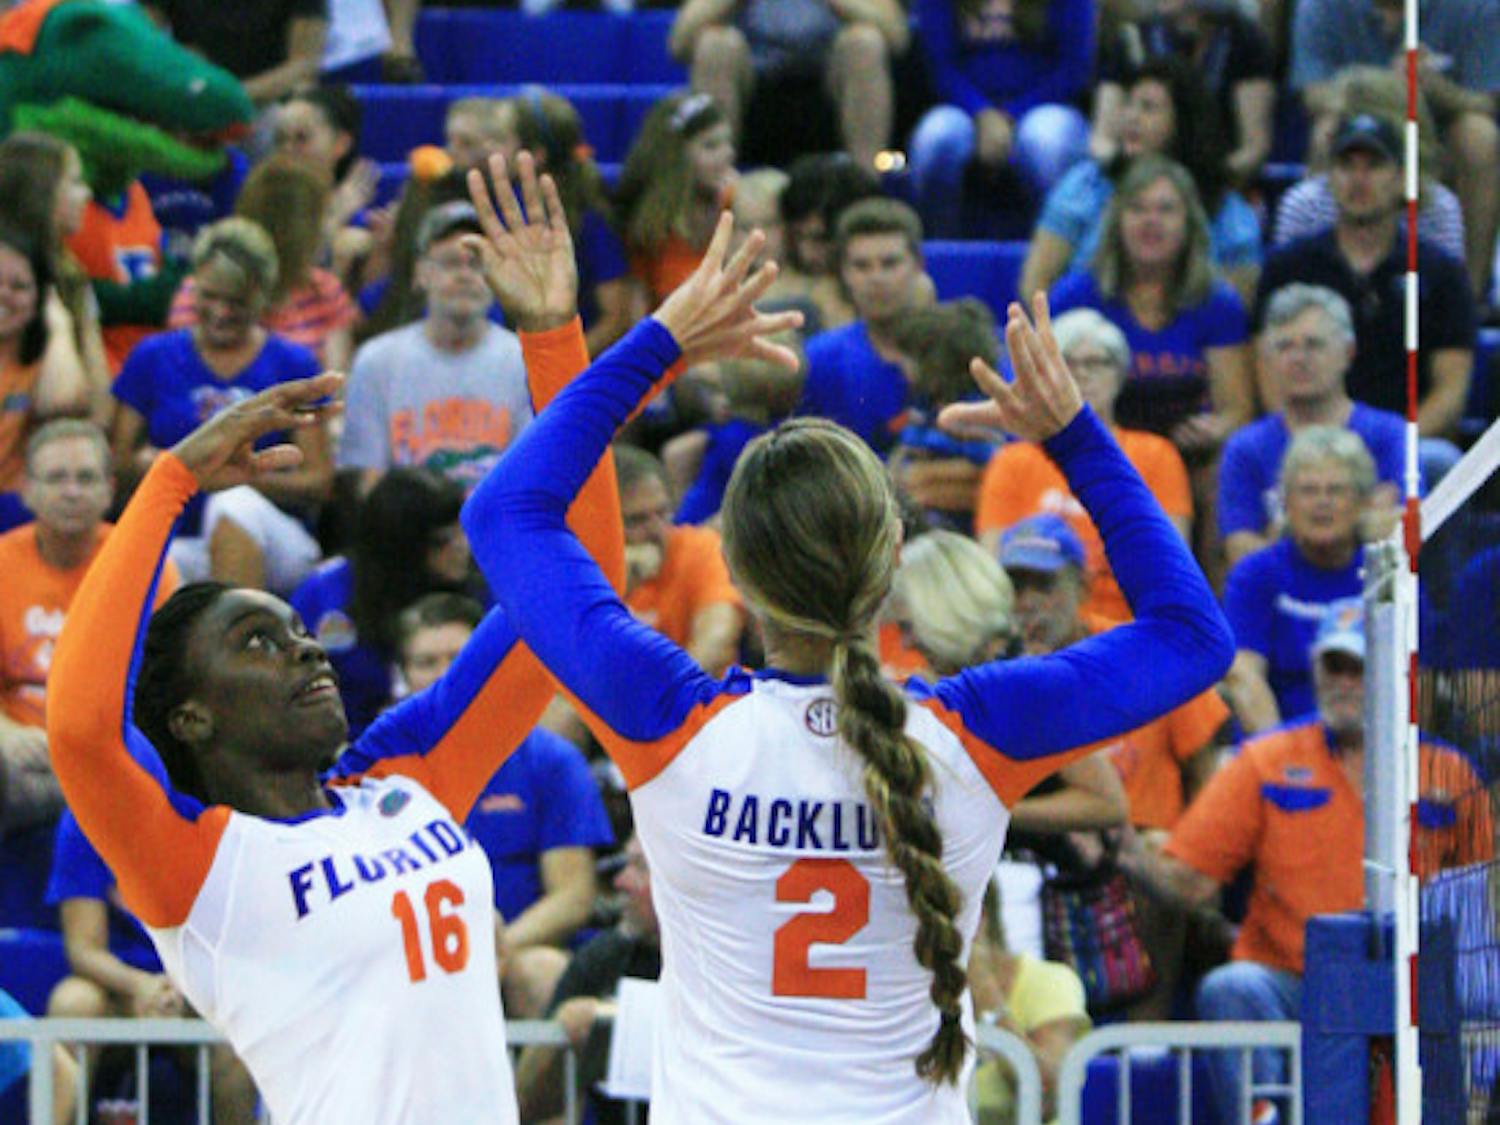 Simone Antwi (16) receives a pass from Dana Backlund (2) during UF’s 3-0 win against Jacksonville on Sept. 7, 2012, in the Stephen C. O'Connell Center. 